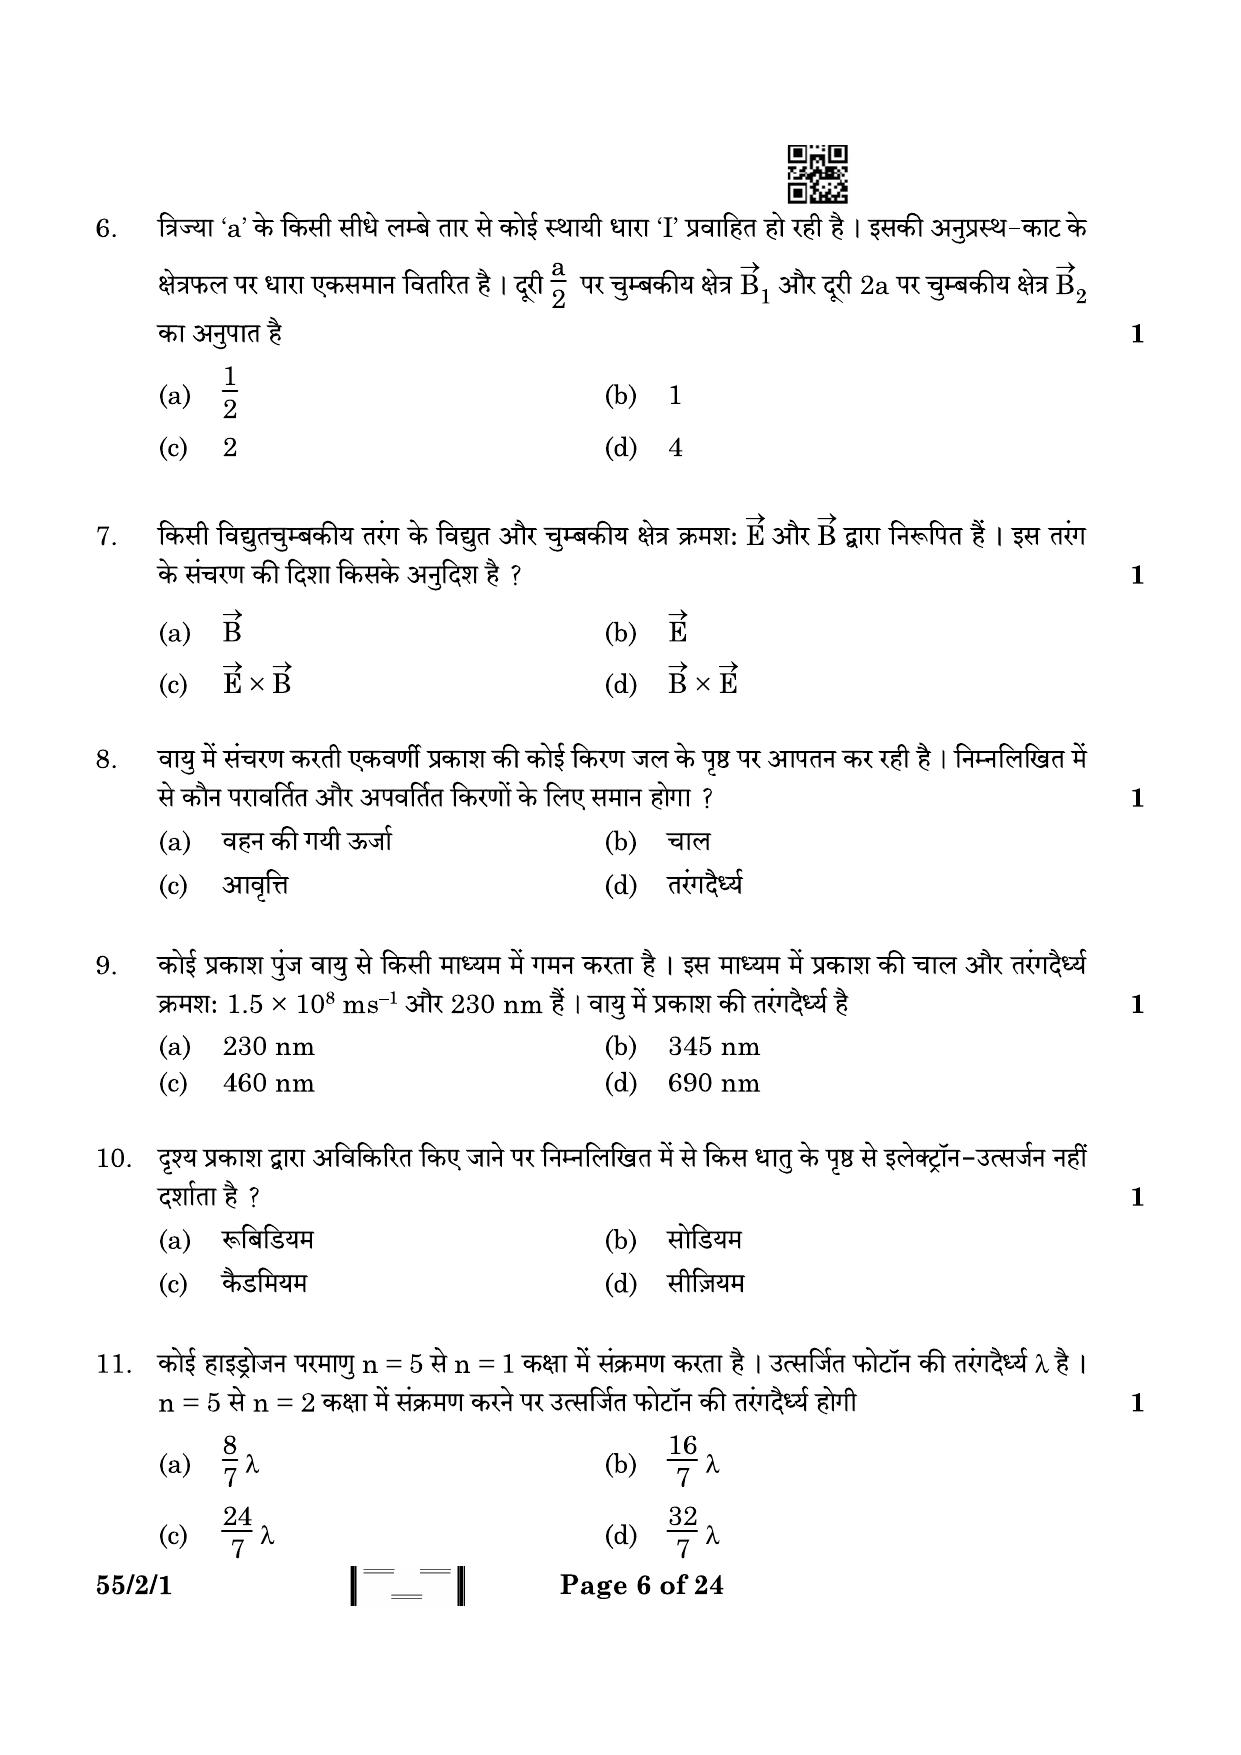 CBSE Class 12 55-2-1 Physics 2023 Question Paper - Page 6